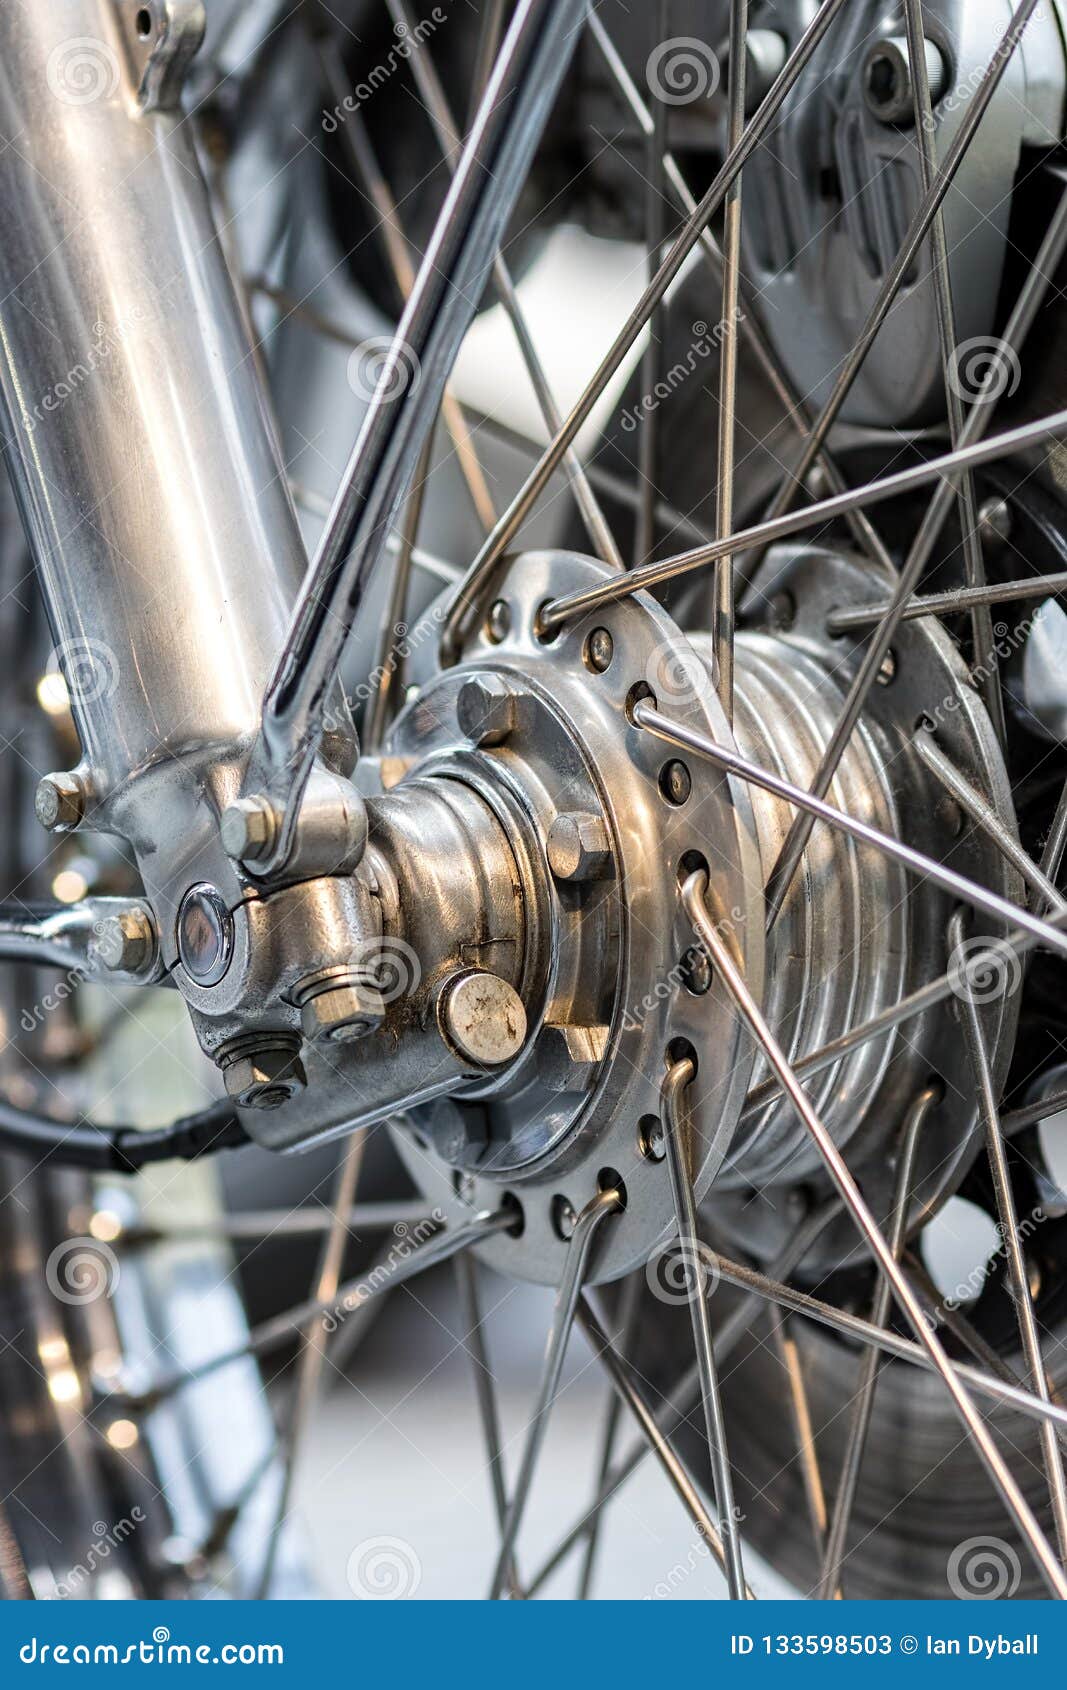 engineered motorcycle wheel parts. disc brake suspension and spo